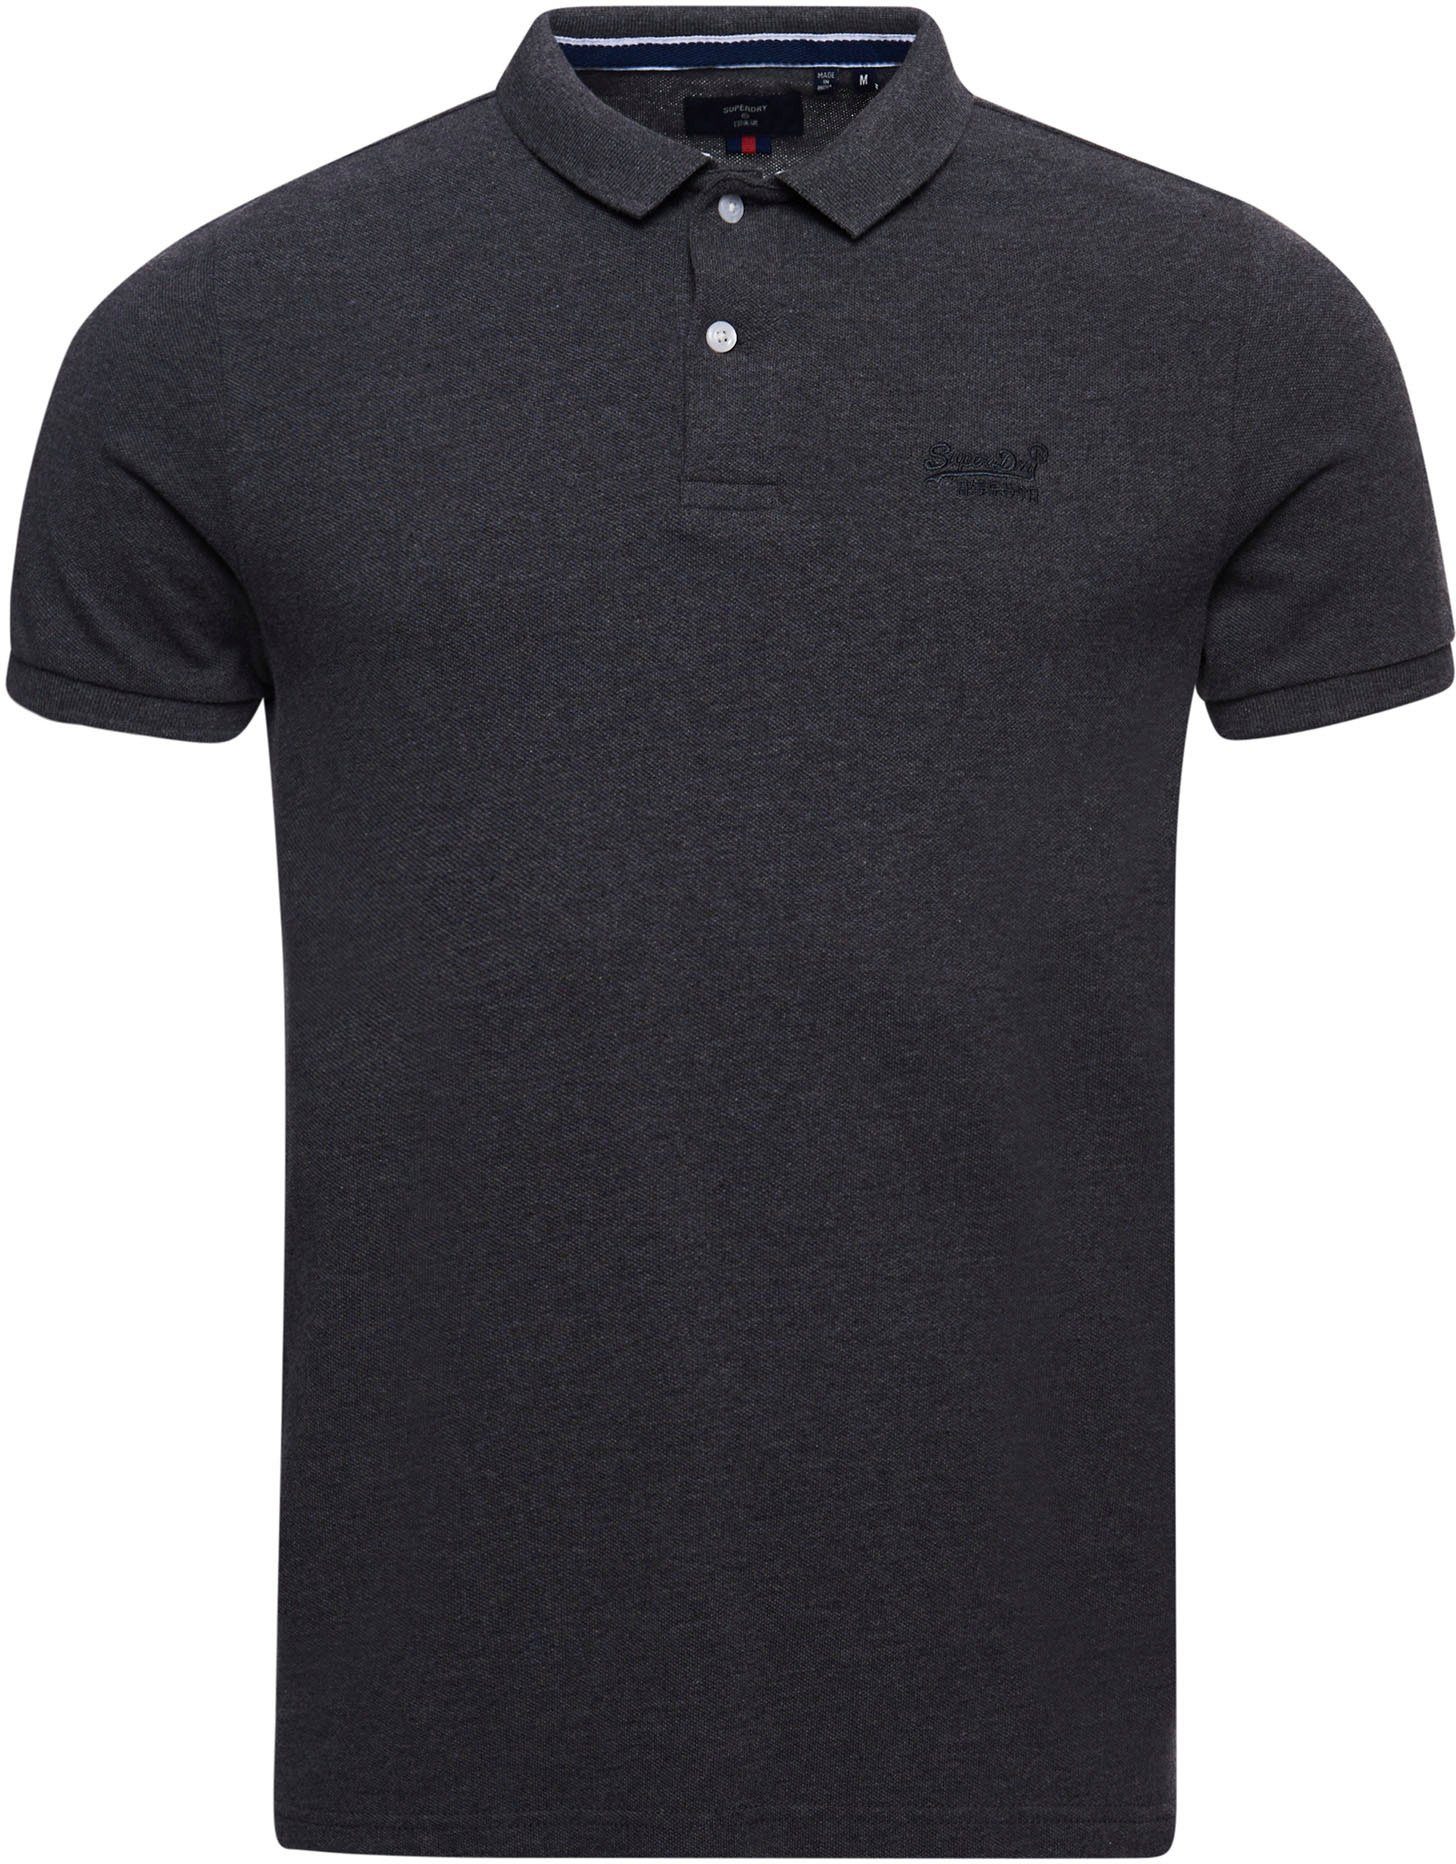 Superdry Poloshirt CLASSIC marl PIQUE charcoal POLO rich